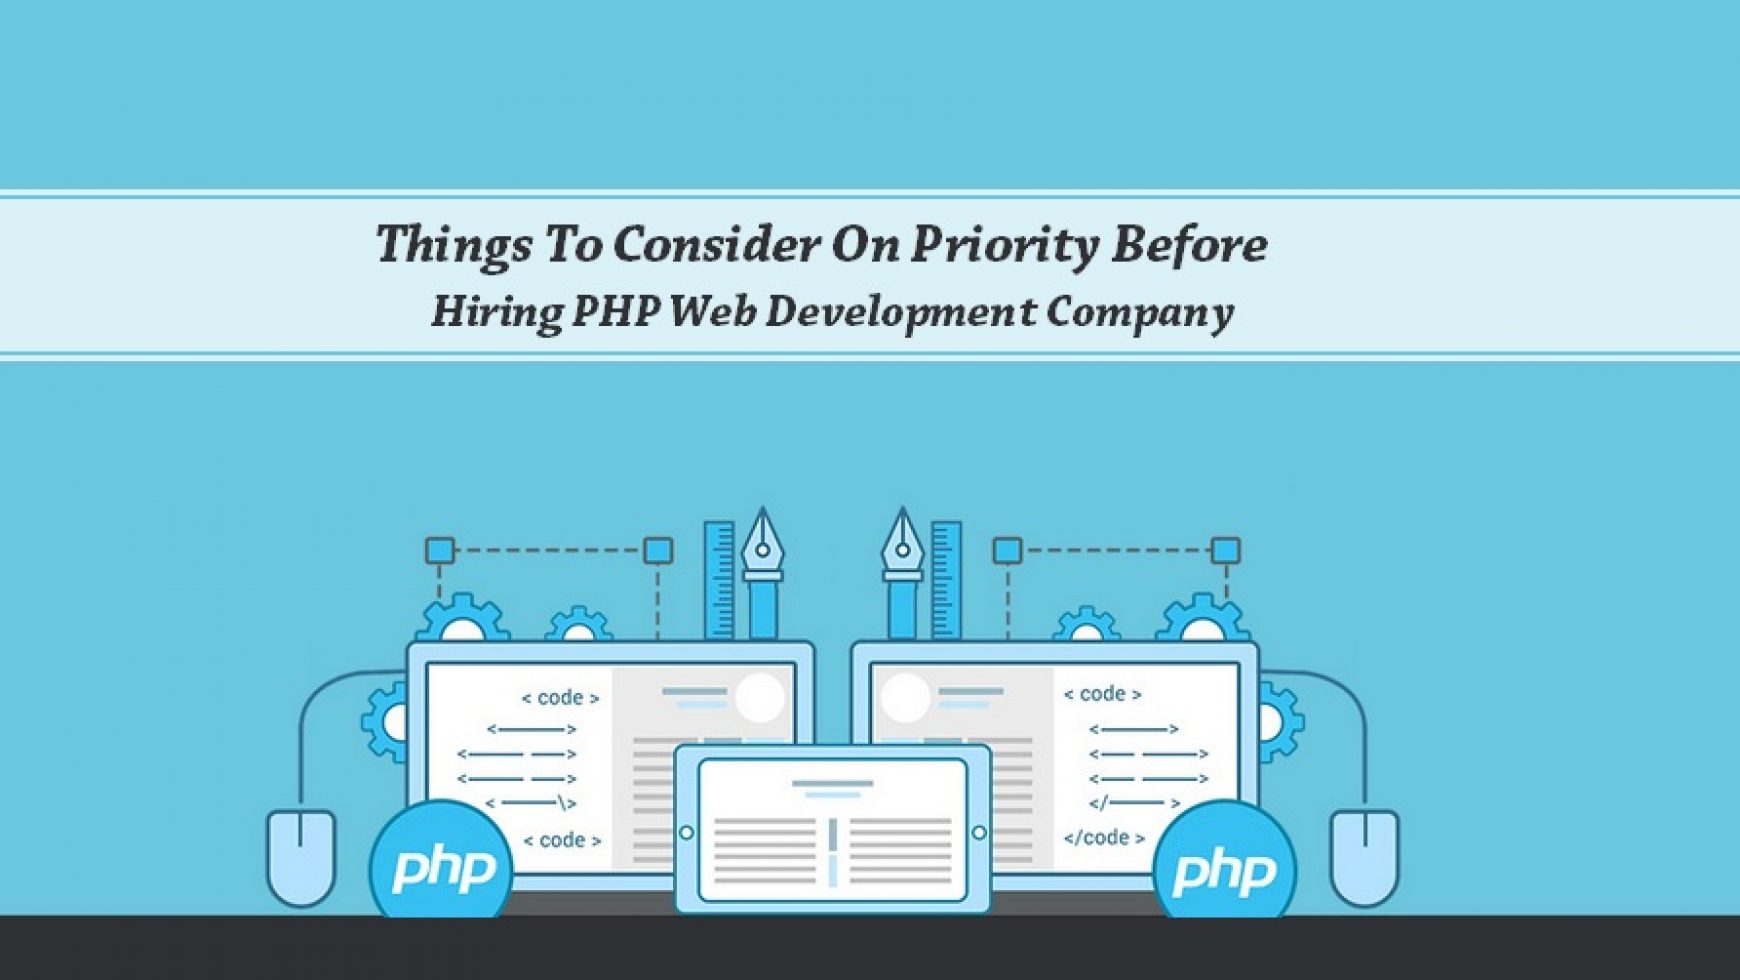 Things To Consider On Priority Before Hiring PHP Web Development Company